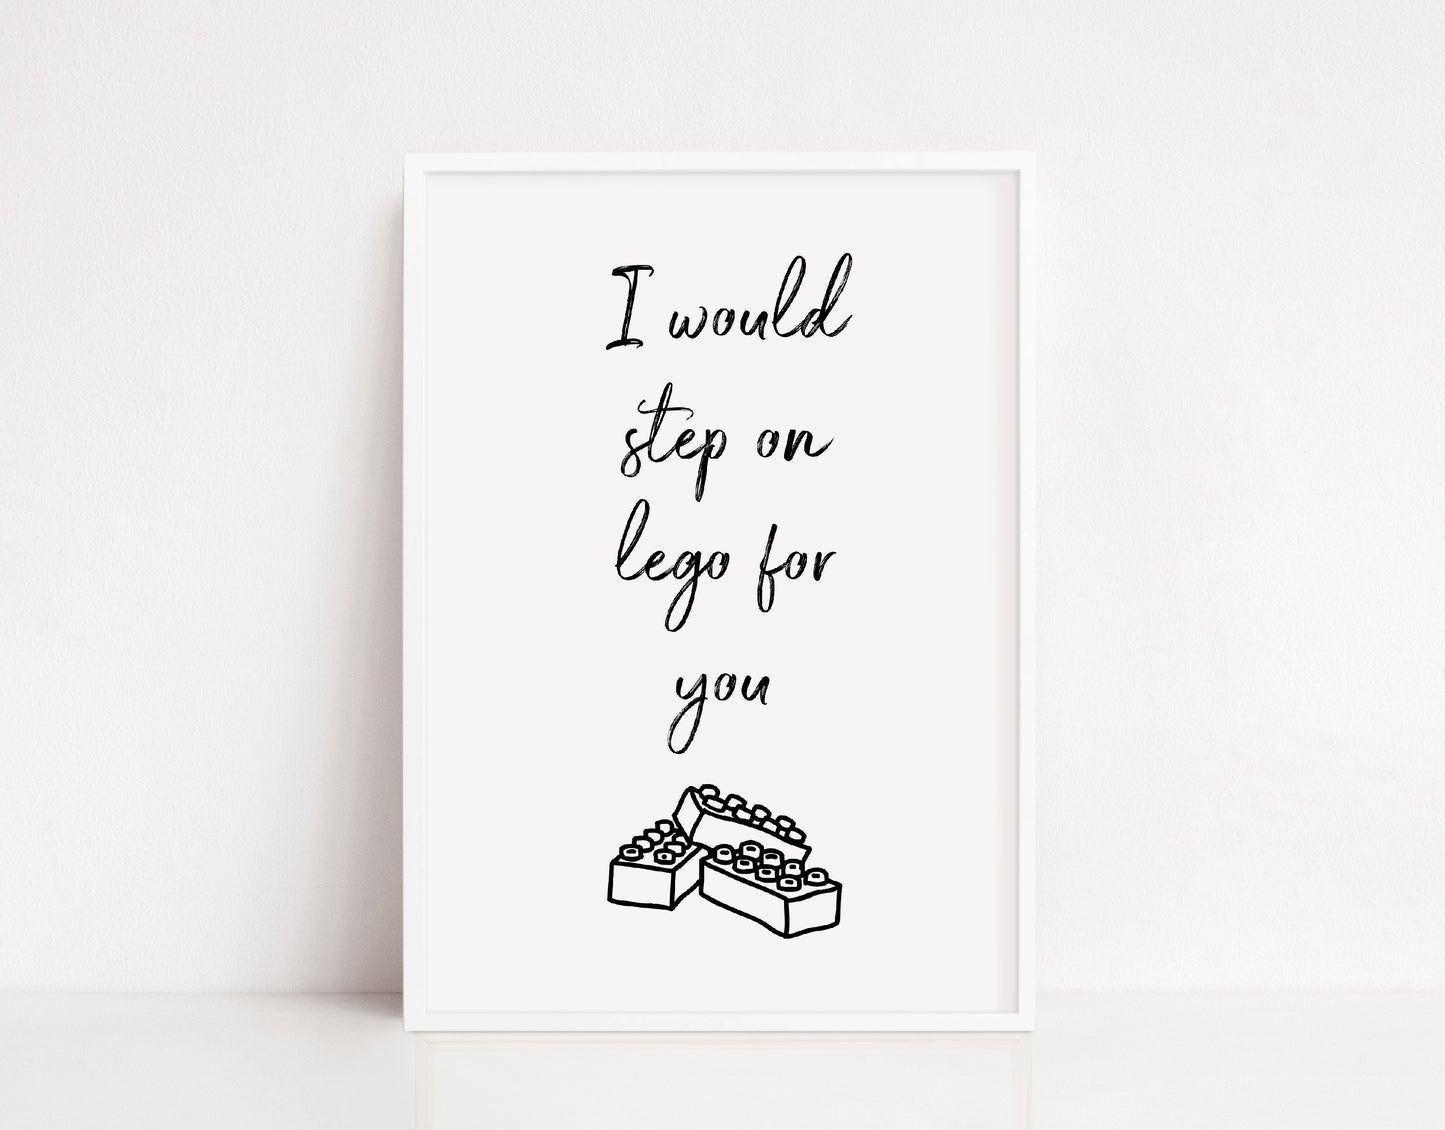 Quote Print | I Would Step On Lego For You | Funny Print | Cute Print